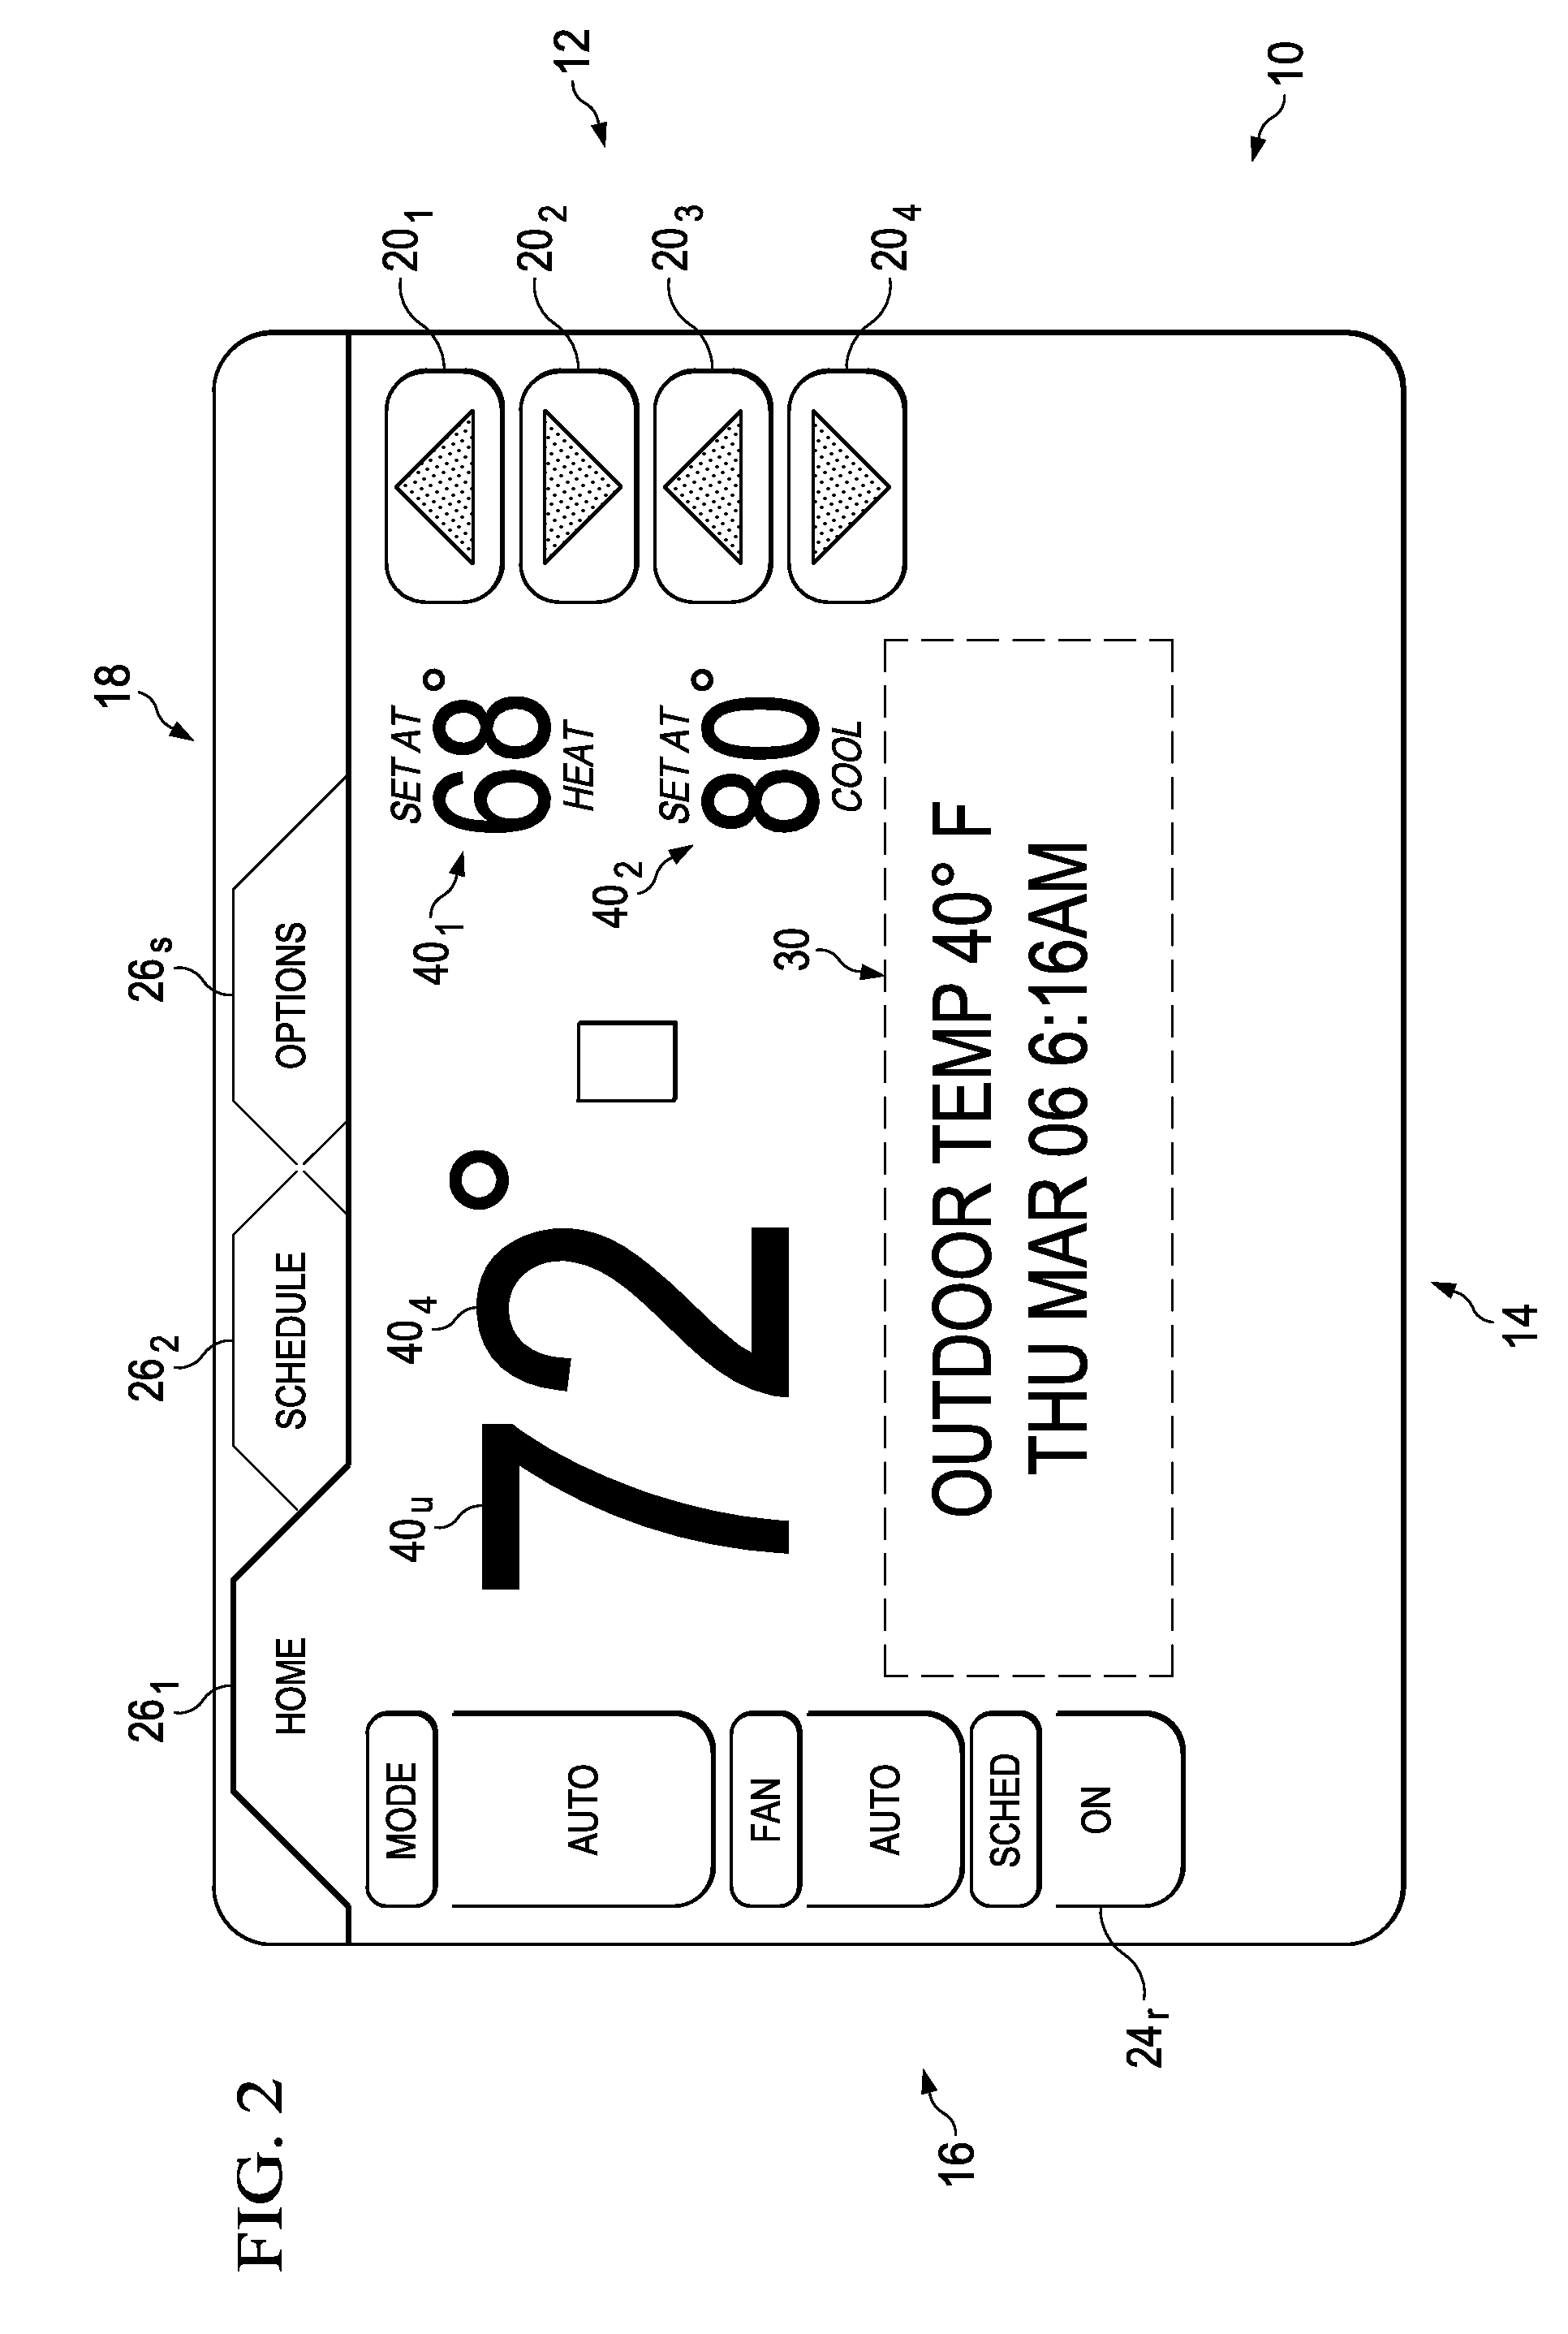 Display apparatus and method having textual system status message display capability for an enviromental control system